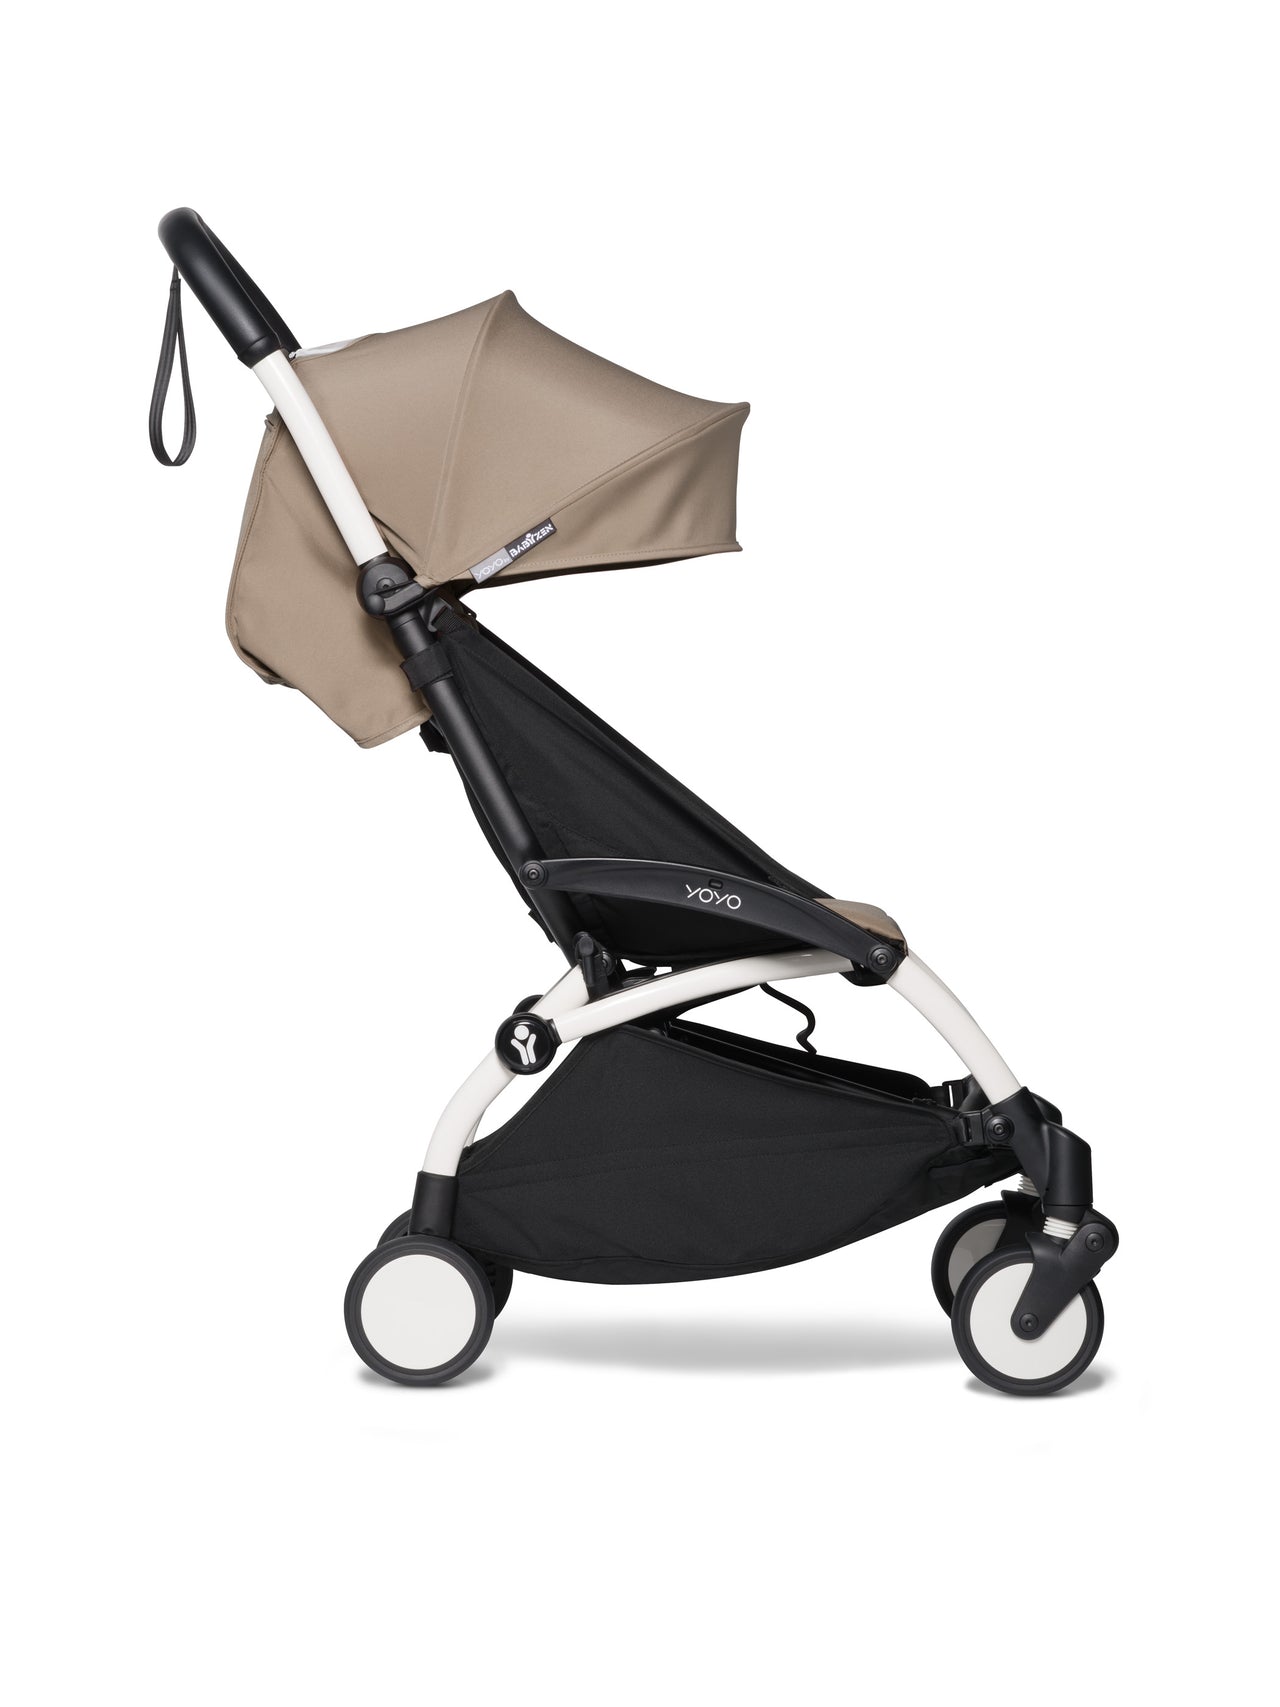 BABYZEN YOYO² 6+ Stroller (White Frame)- Taupe with FREE BACKPACK!